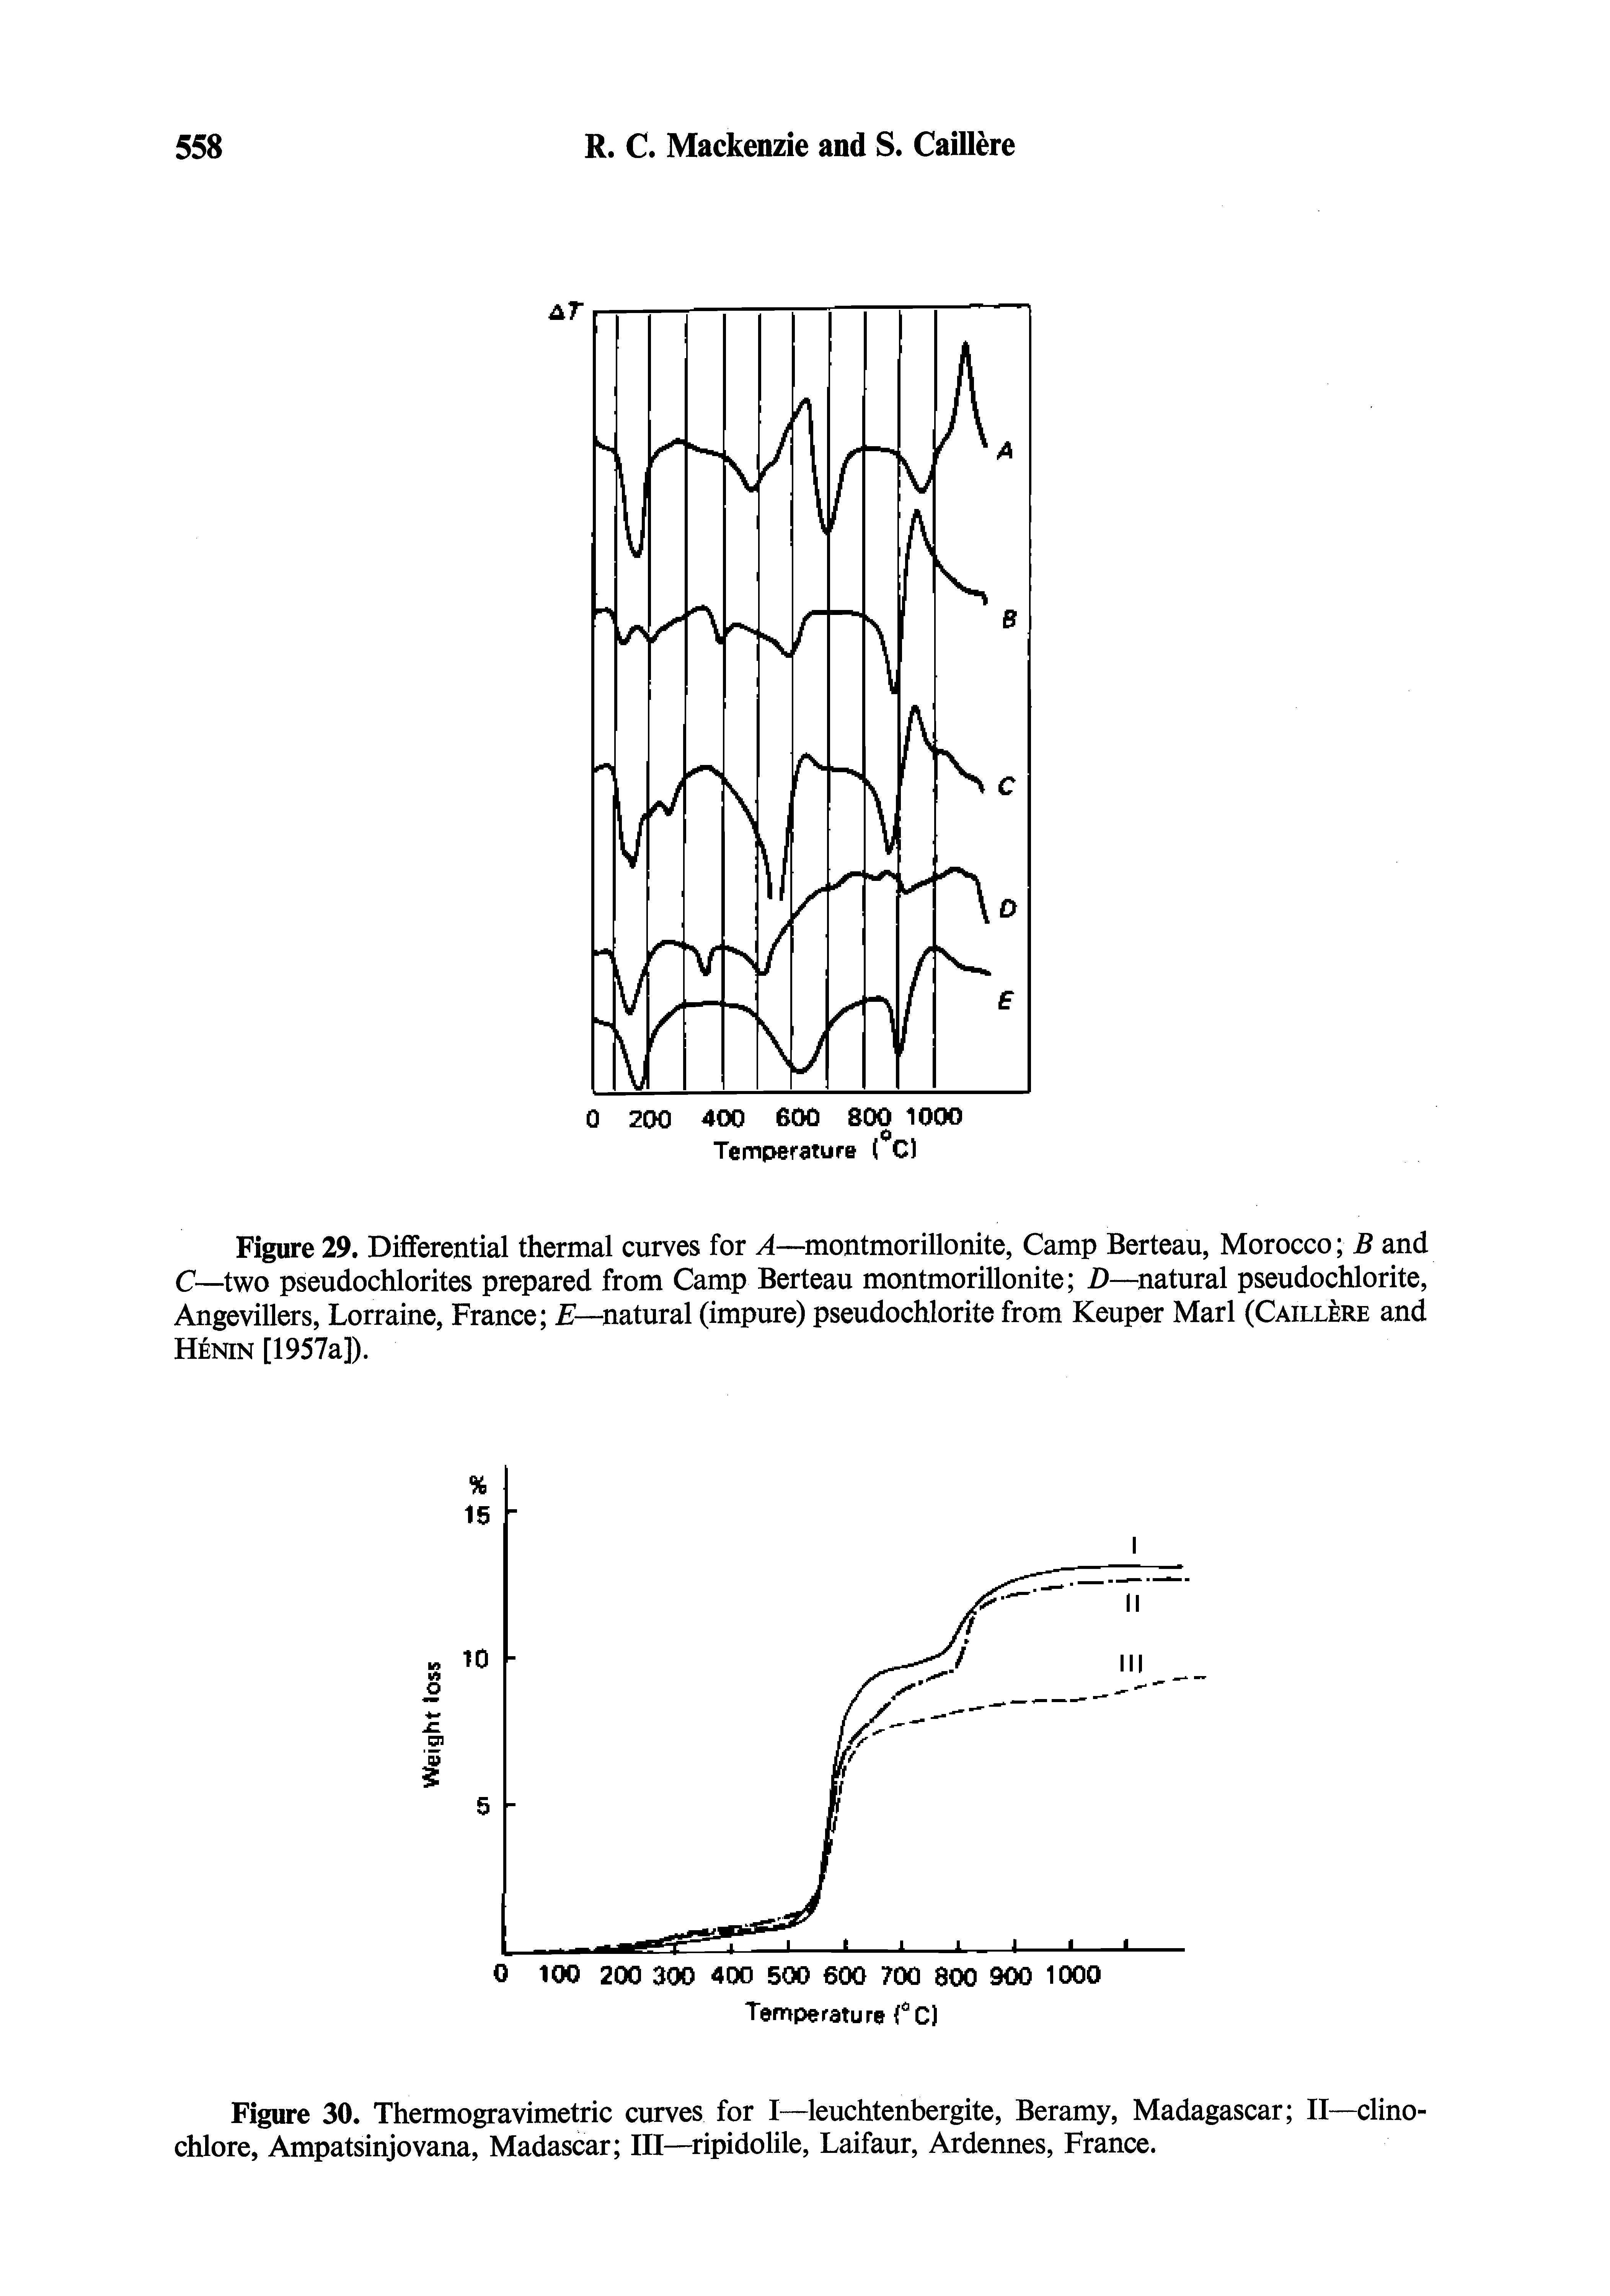 Figure 29. Differential thermal curves for 4—montmorillonite, Camp Berteau, Morocco B and C—two pseudochlorites prepared from Camp Berteau montmorillonite D—natural pseudochlorite, Angevillers, Lorraine, France -natural (impure) pseudochlorite from Keuper Marl (Caillere and Henin [1957a]).